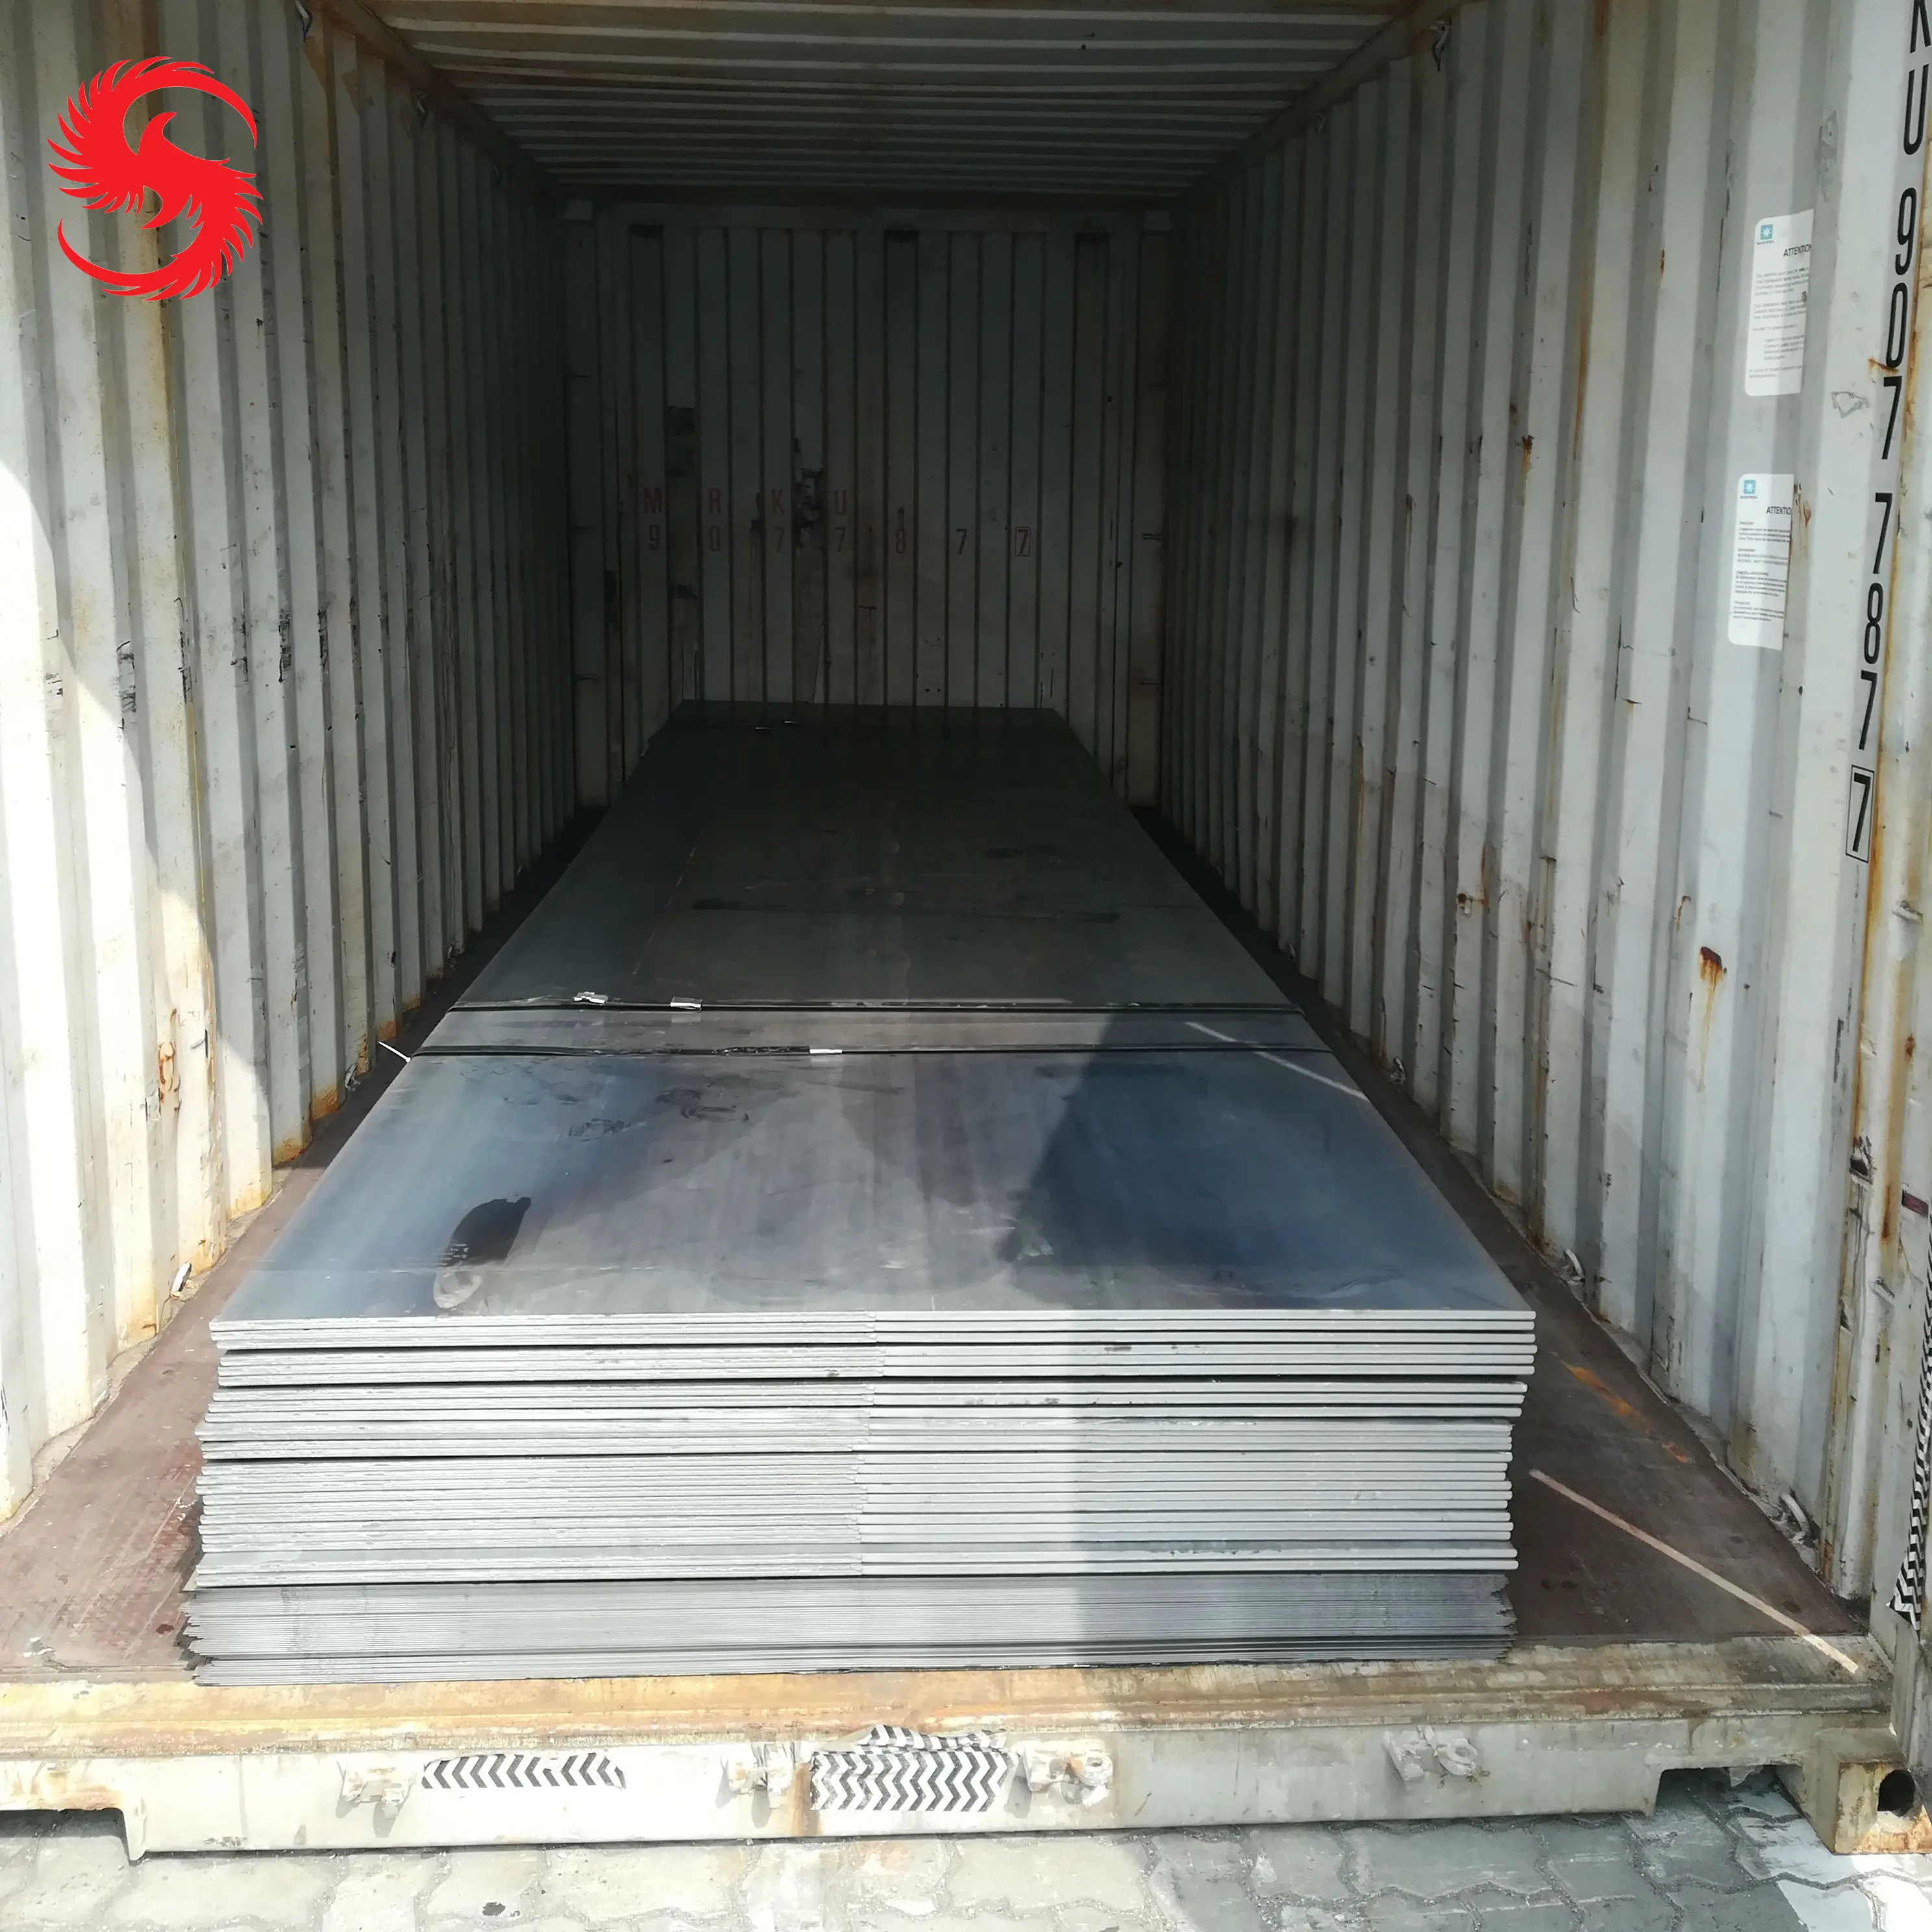 Grade 250 Structural Steel Sheet 2400 X 10 X 12 Ms Plate Buy Grade 250 Steel As3678 Grade 250 Steel Plate Mild Steel Grade 250 Product On Alibaba Com